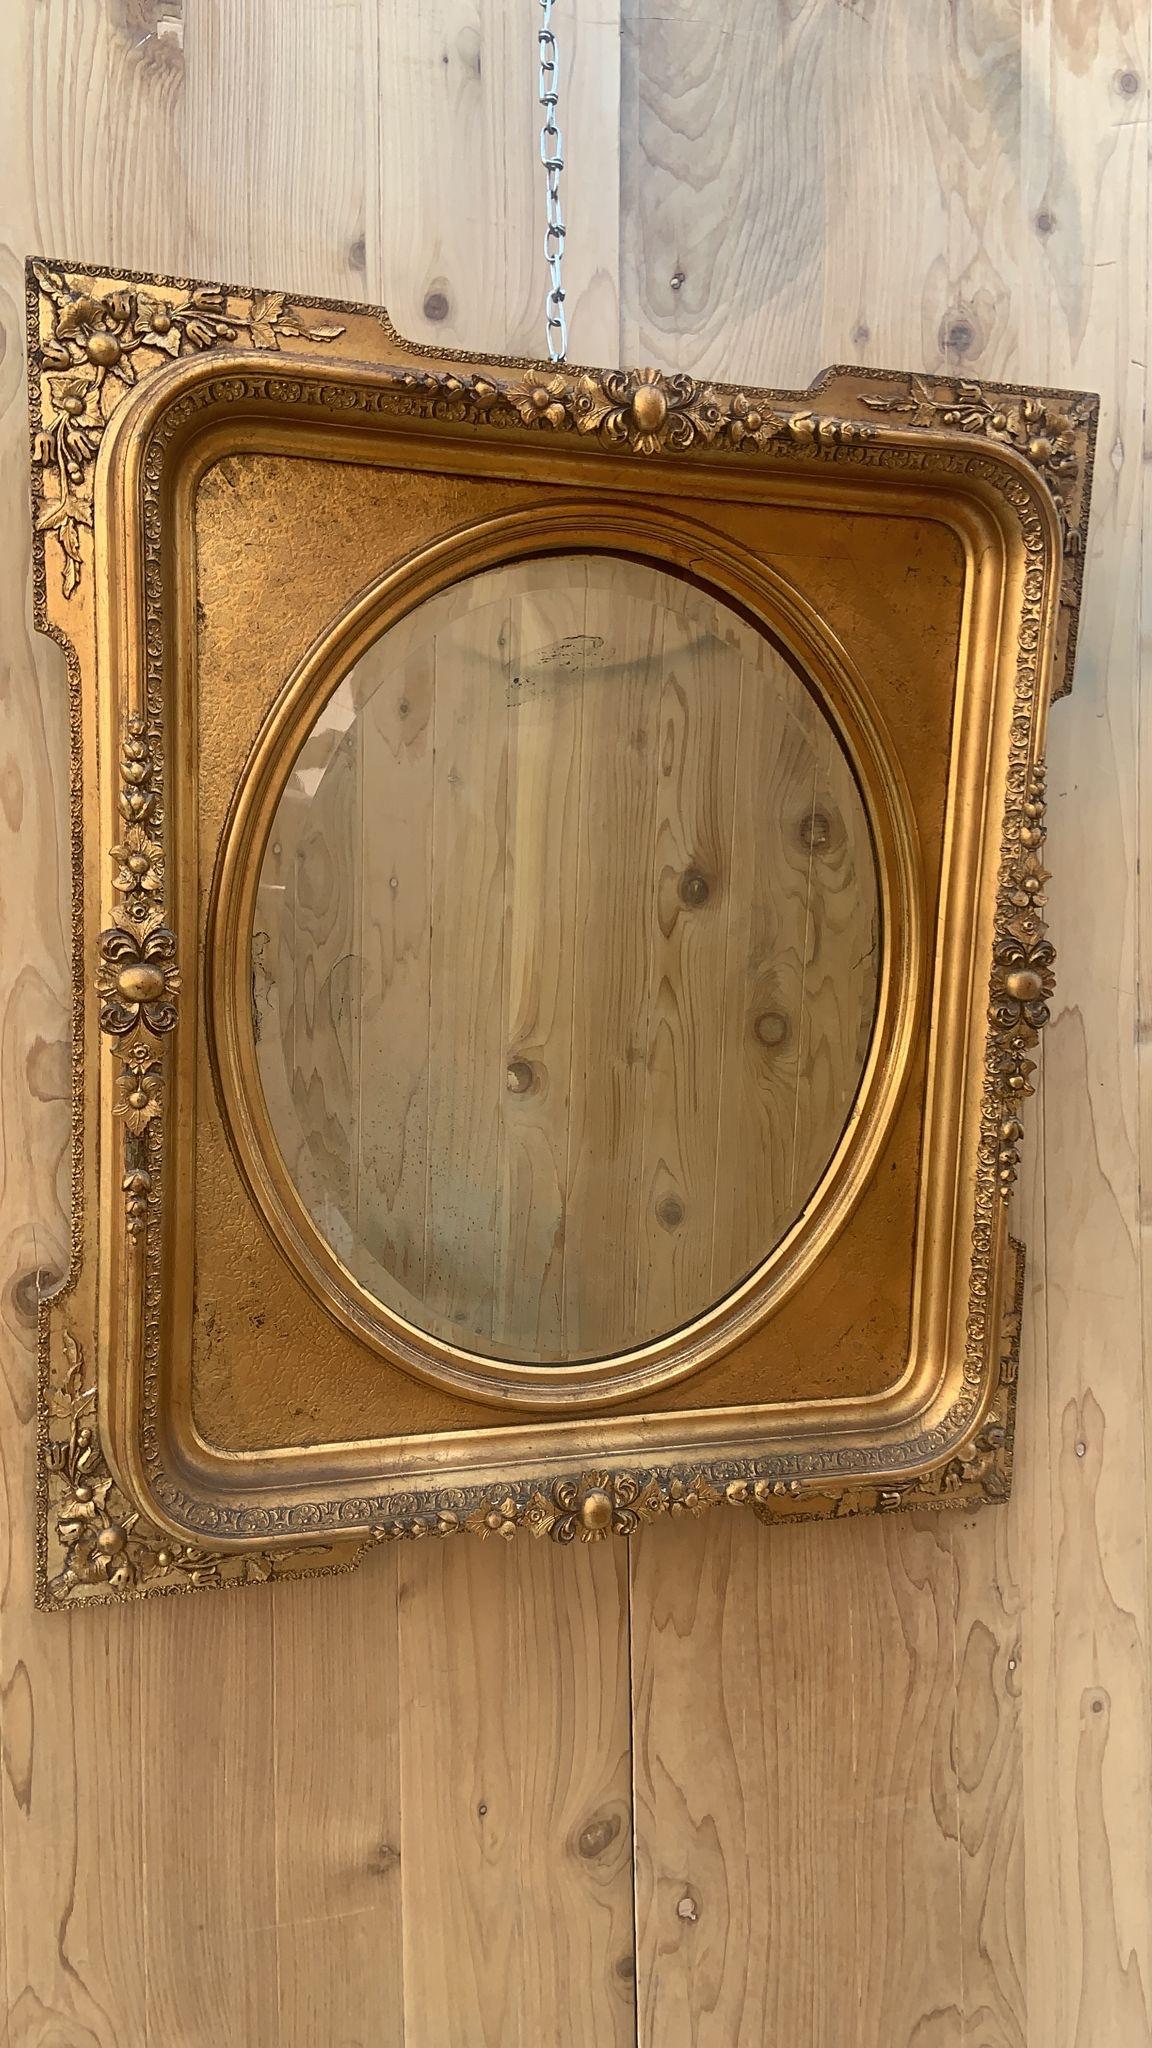 Antique French Napoleon III Style Carved and Gilded Beveled Framed Wall Mirror

Antique French Napoleon III Style Ornate Framed Wall Mirror. This hand carved mirror has beautiful details. Gold-Gilded Beveled Oval Wall Mirror Frame made in the 19th